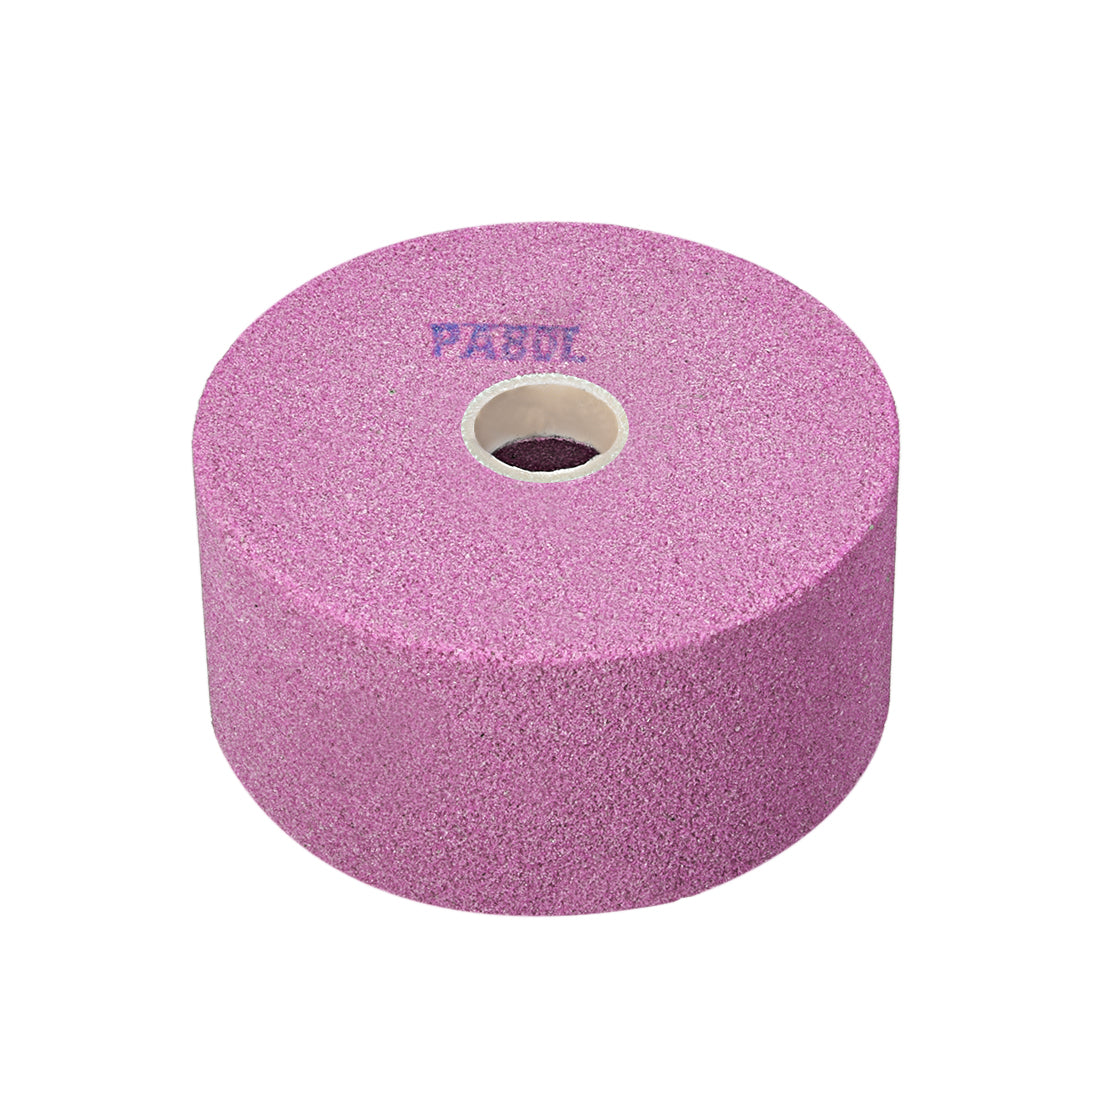 uxcell Uxcell 4-Inch Cup Grinding Wheel 80 Grits Pink Aluminum Oxide PA Abrasive Wheels